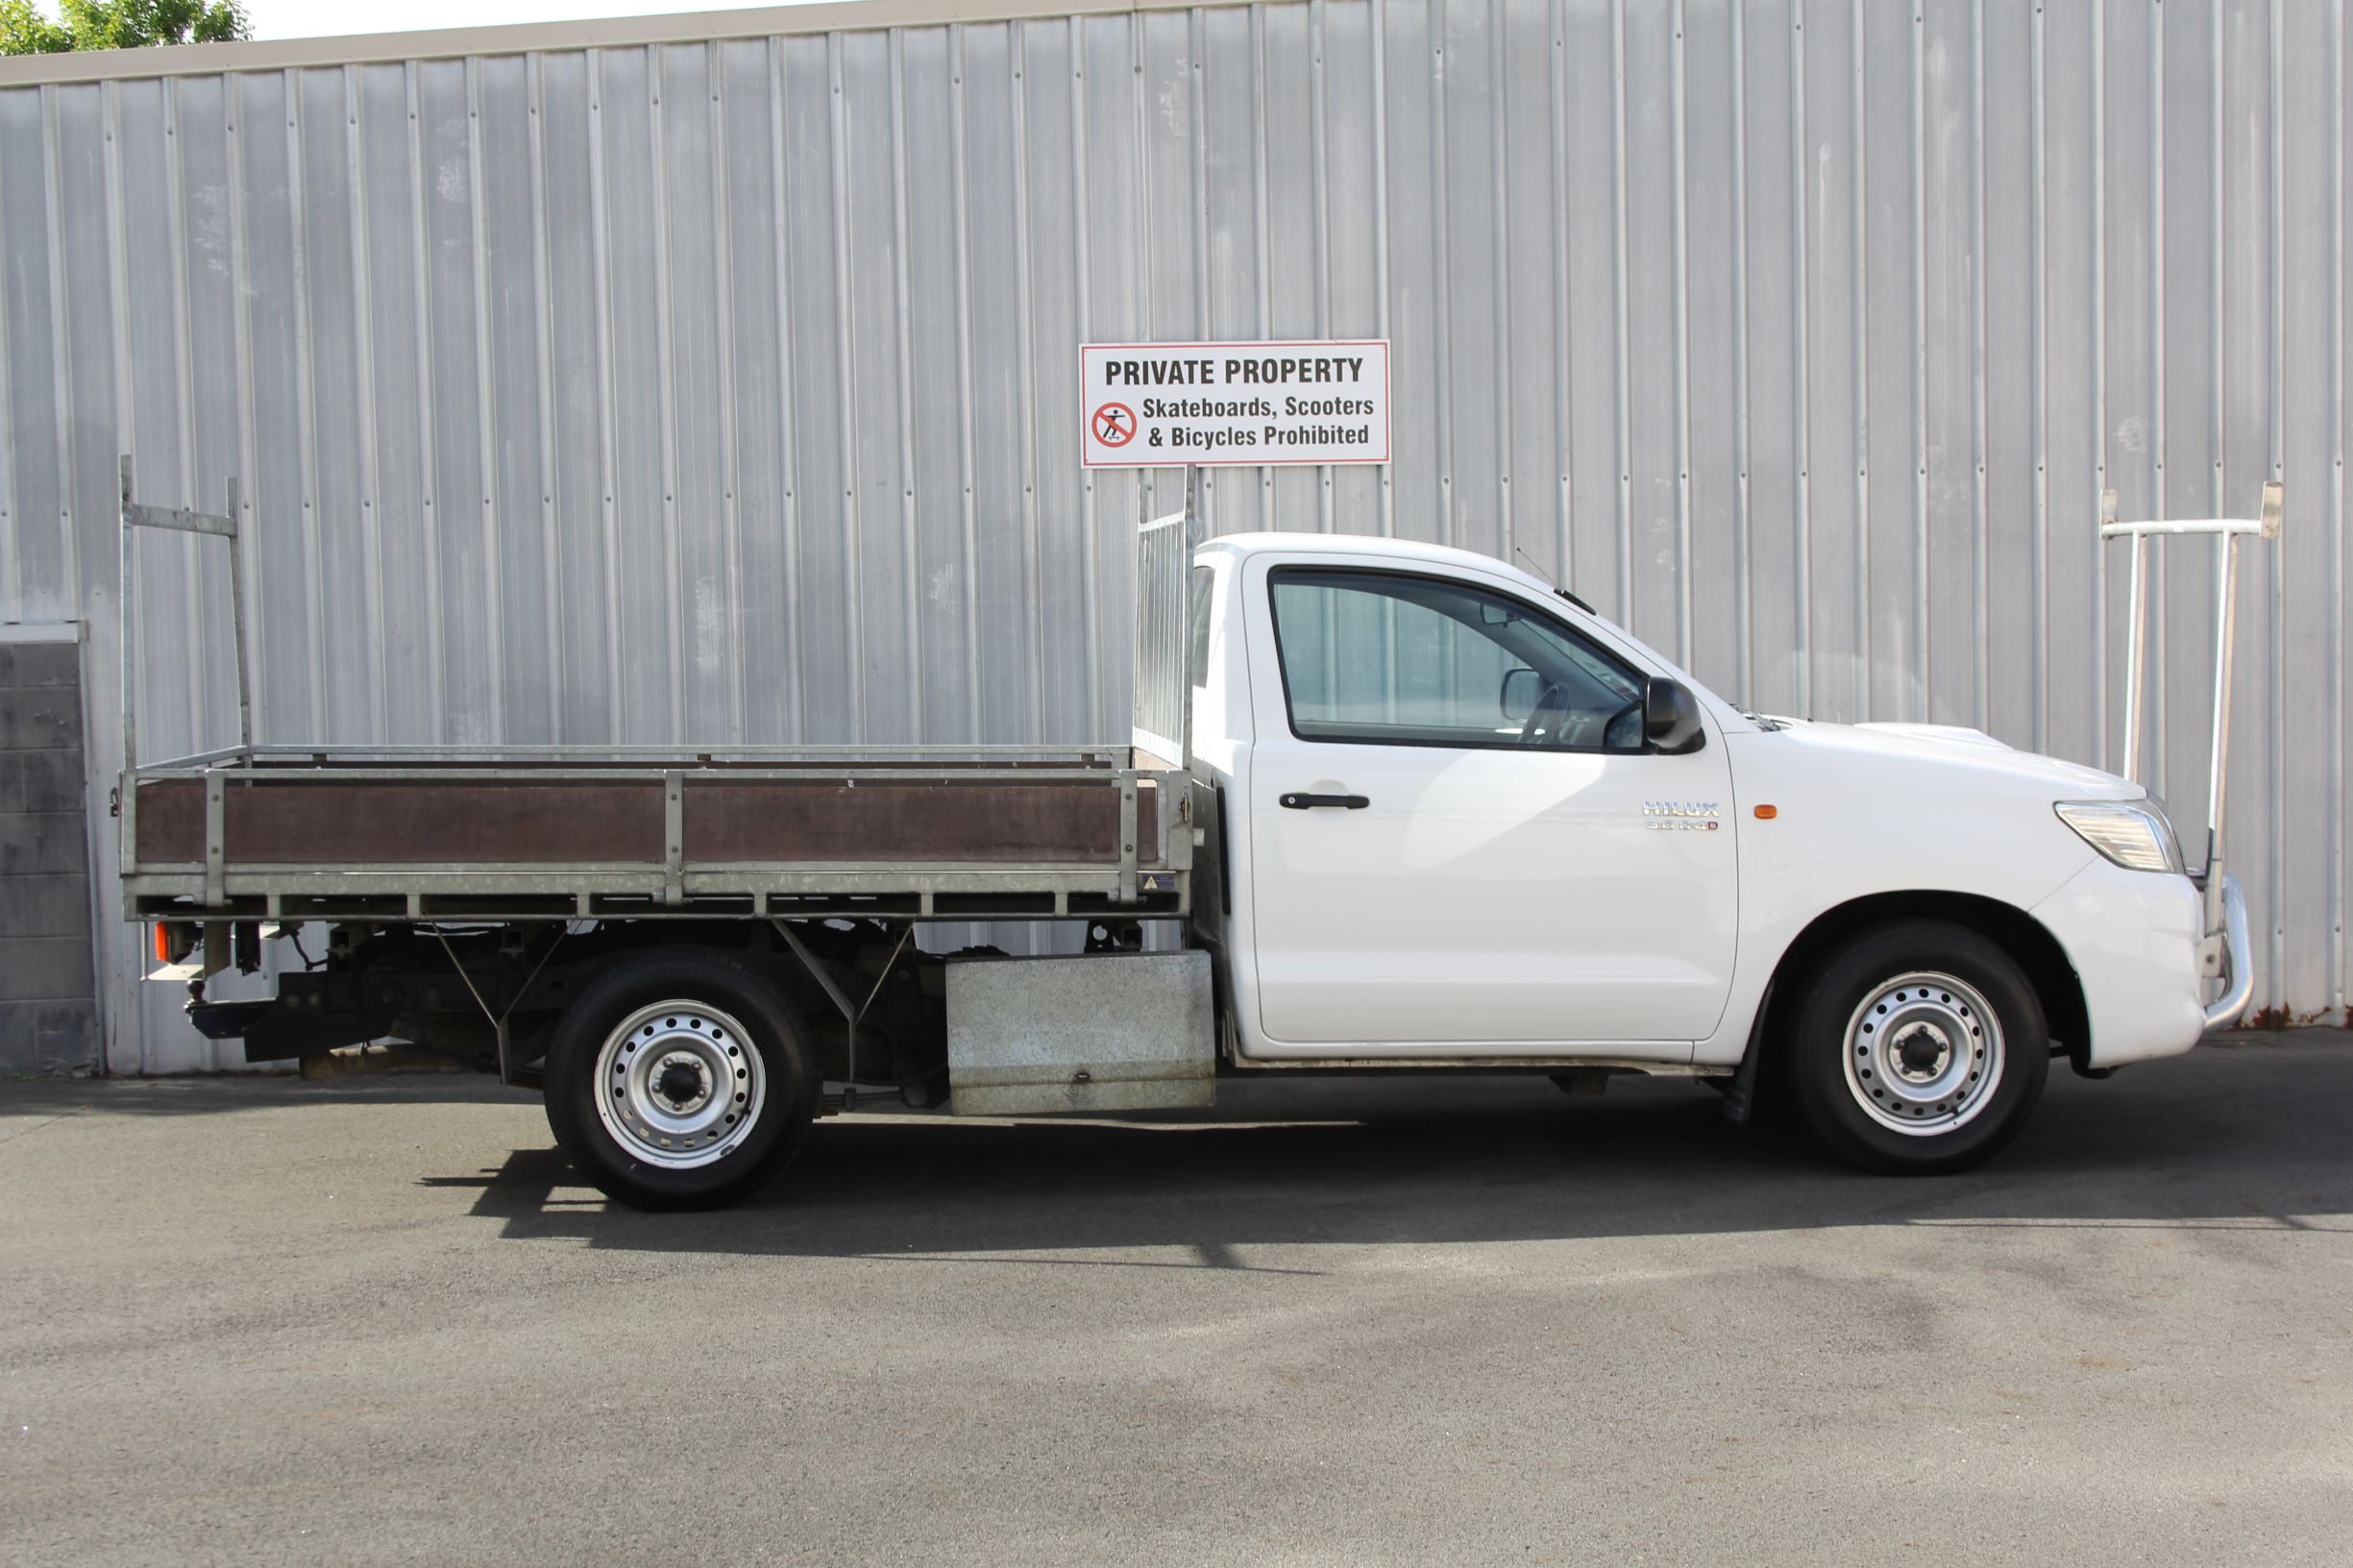 Toyota Hilux  2014 for sale in Auckland